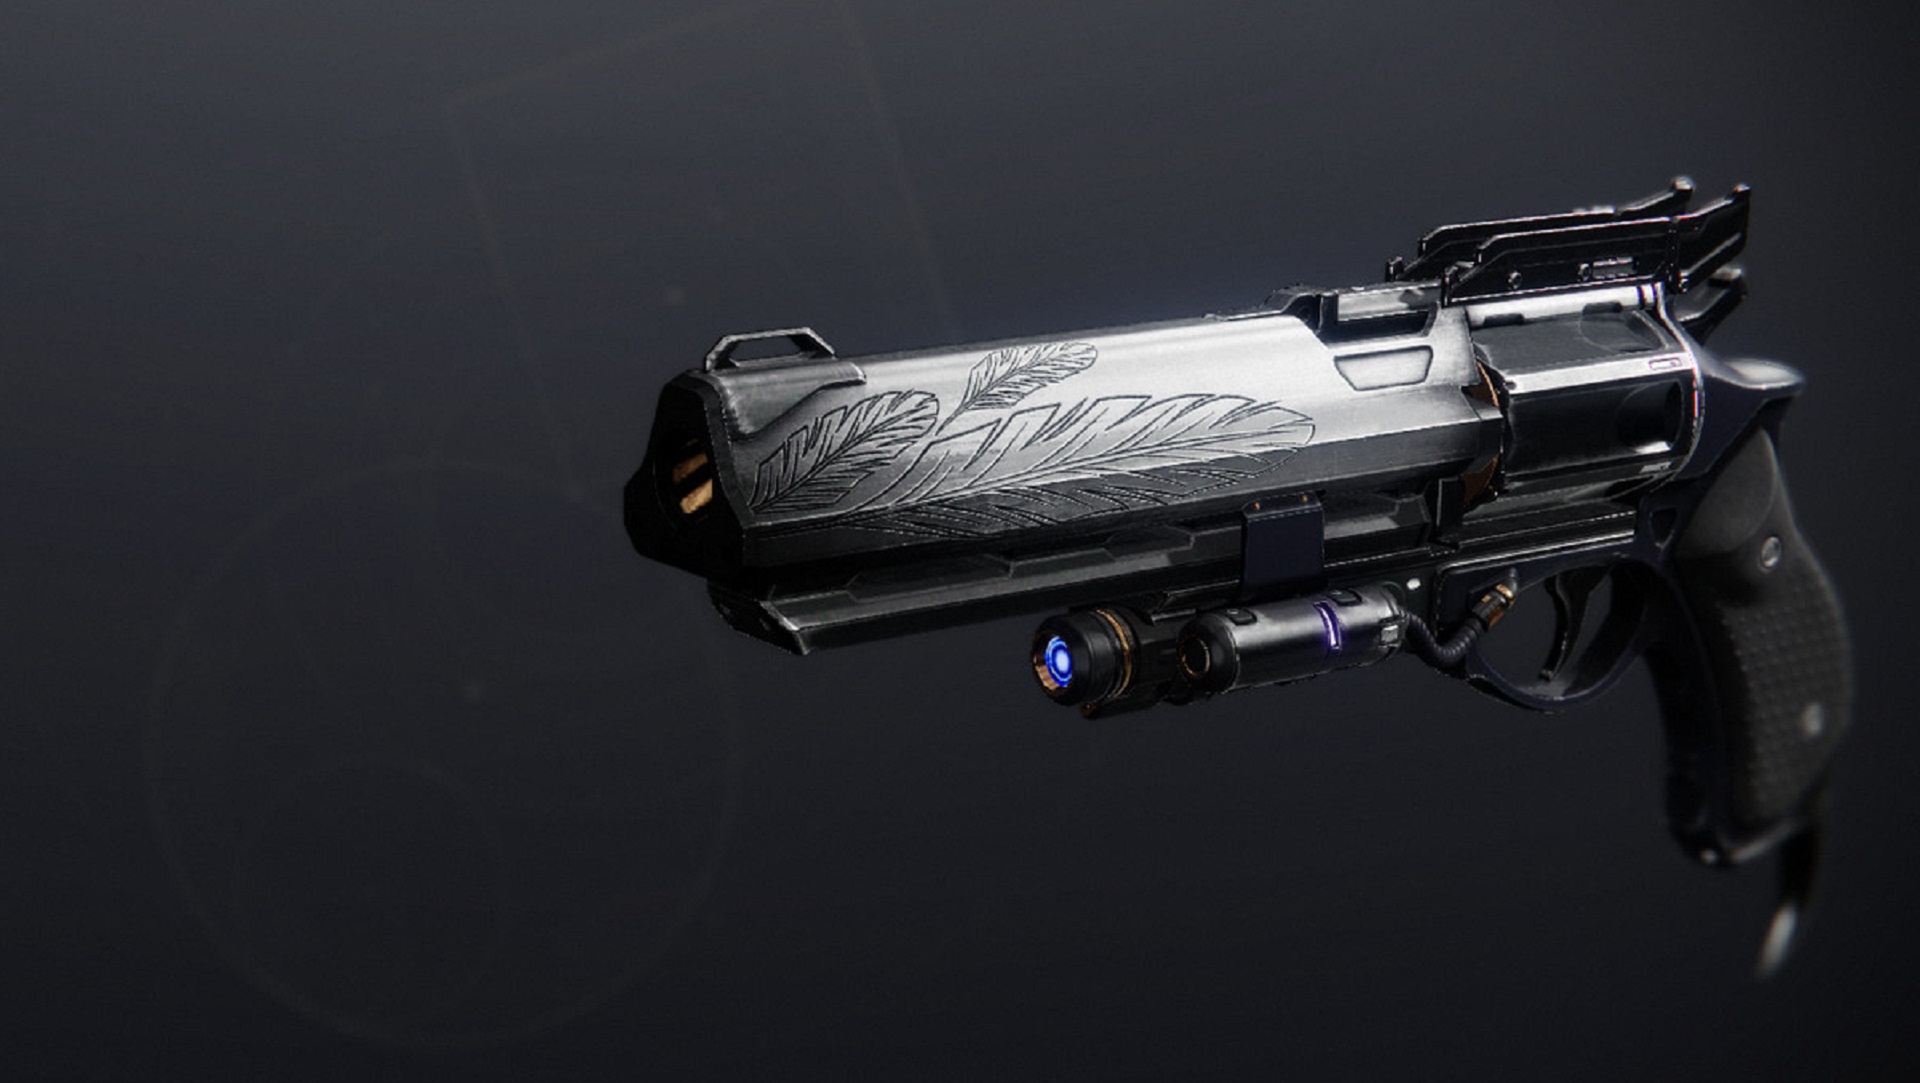 The Hawkmoon is one of the best Destiny 2 best PvP hand cannons.